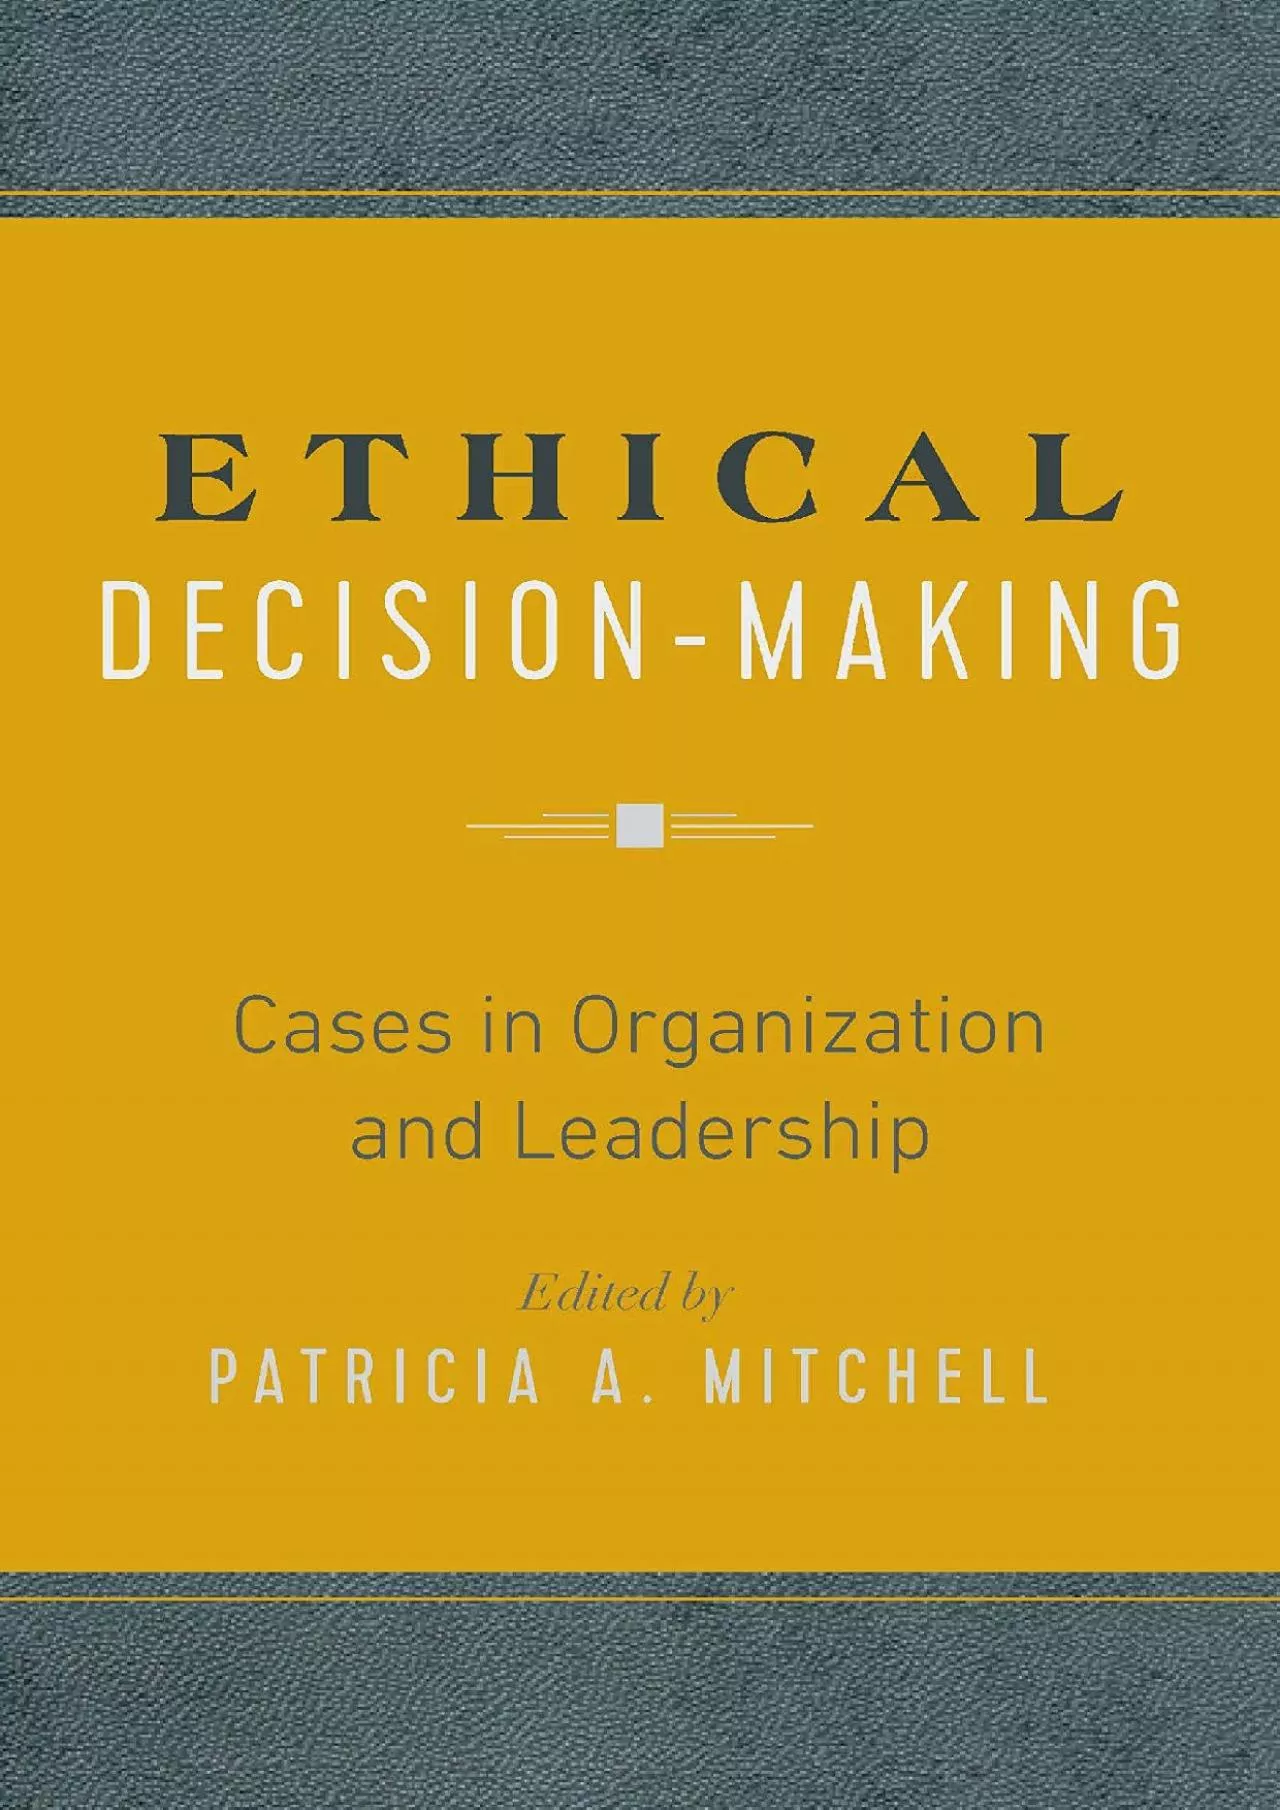 (EBOOK)-Ethical Decision-Making: Cases in Organization and Leadership